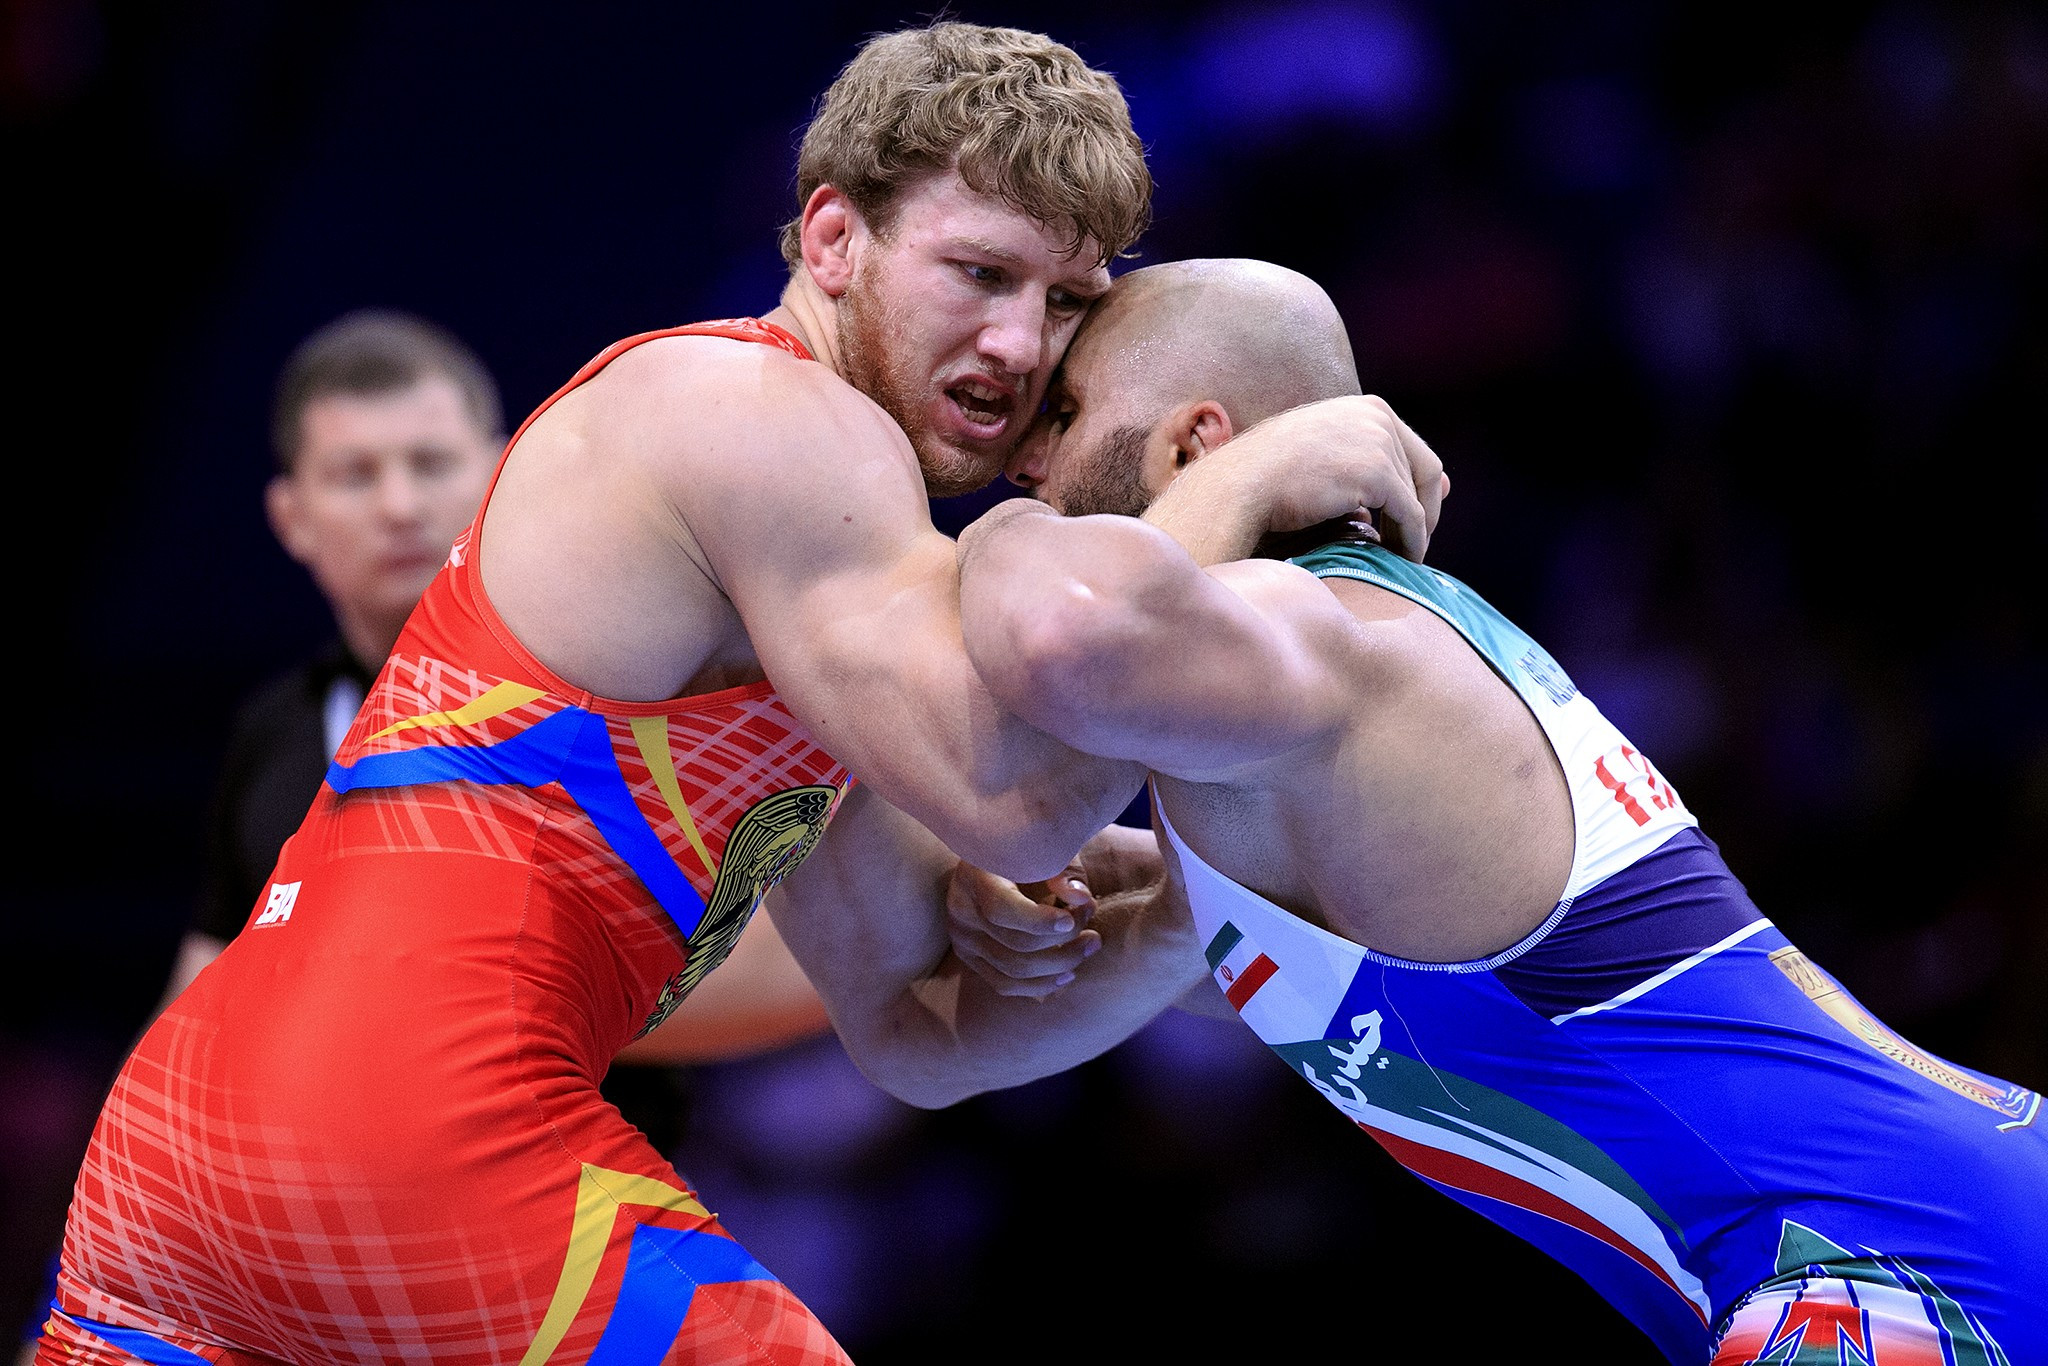 Aleksanyan continues reign of dominance with third straight title at UWW Wrestling World Championships